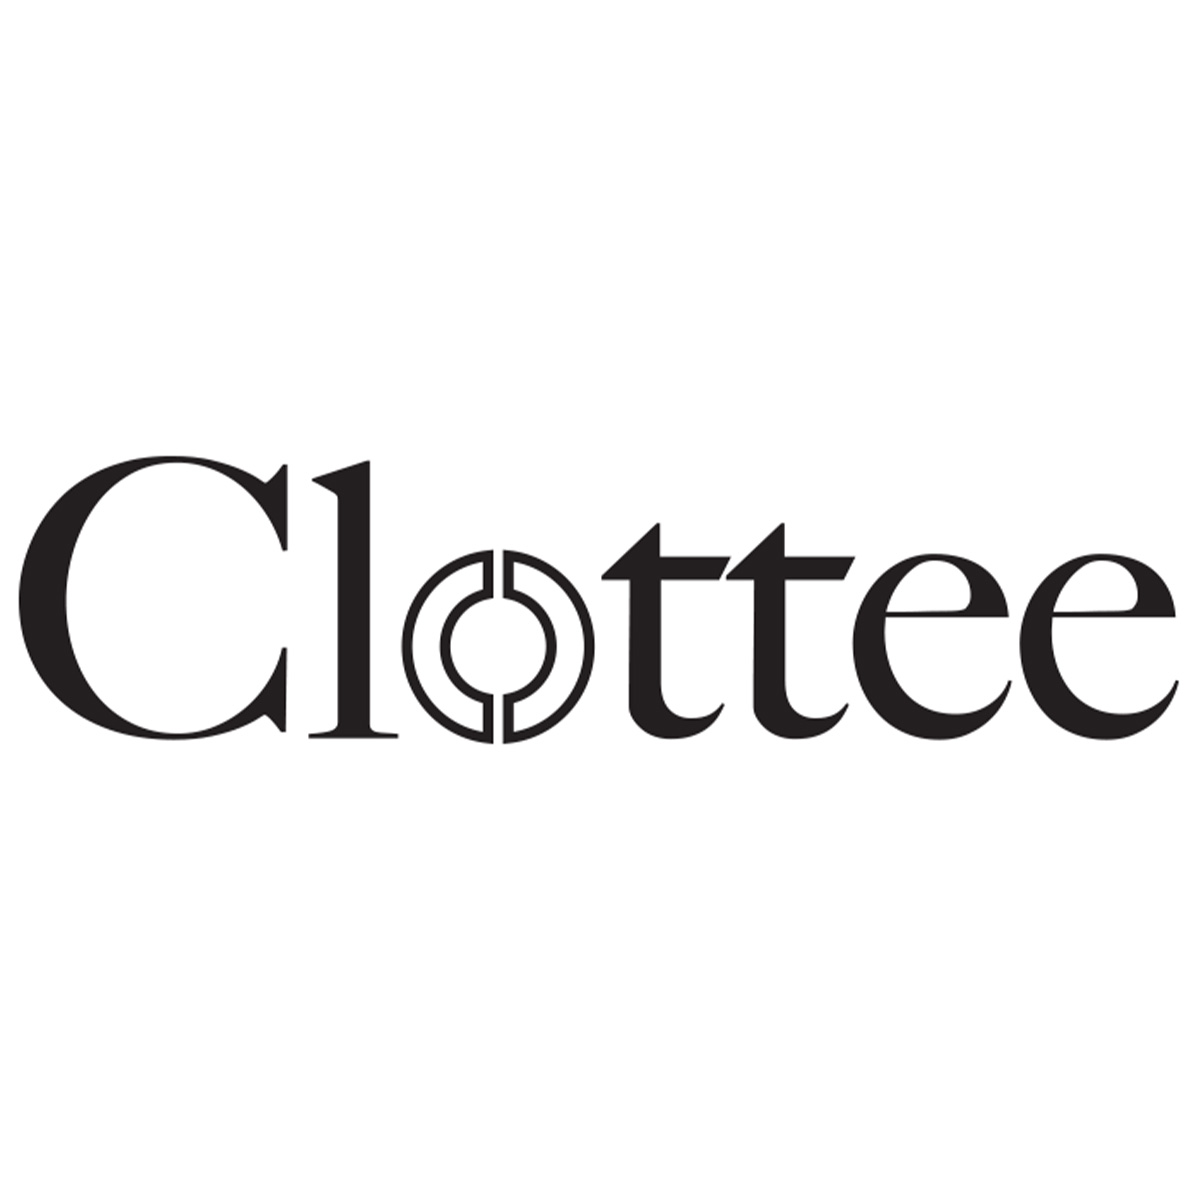 CLOTTEE by CLOT